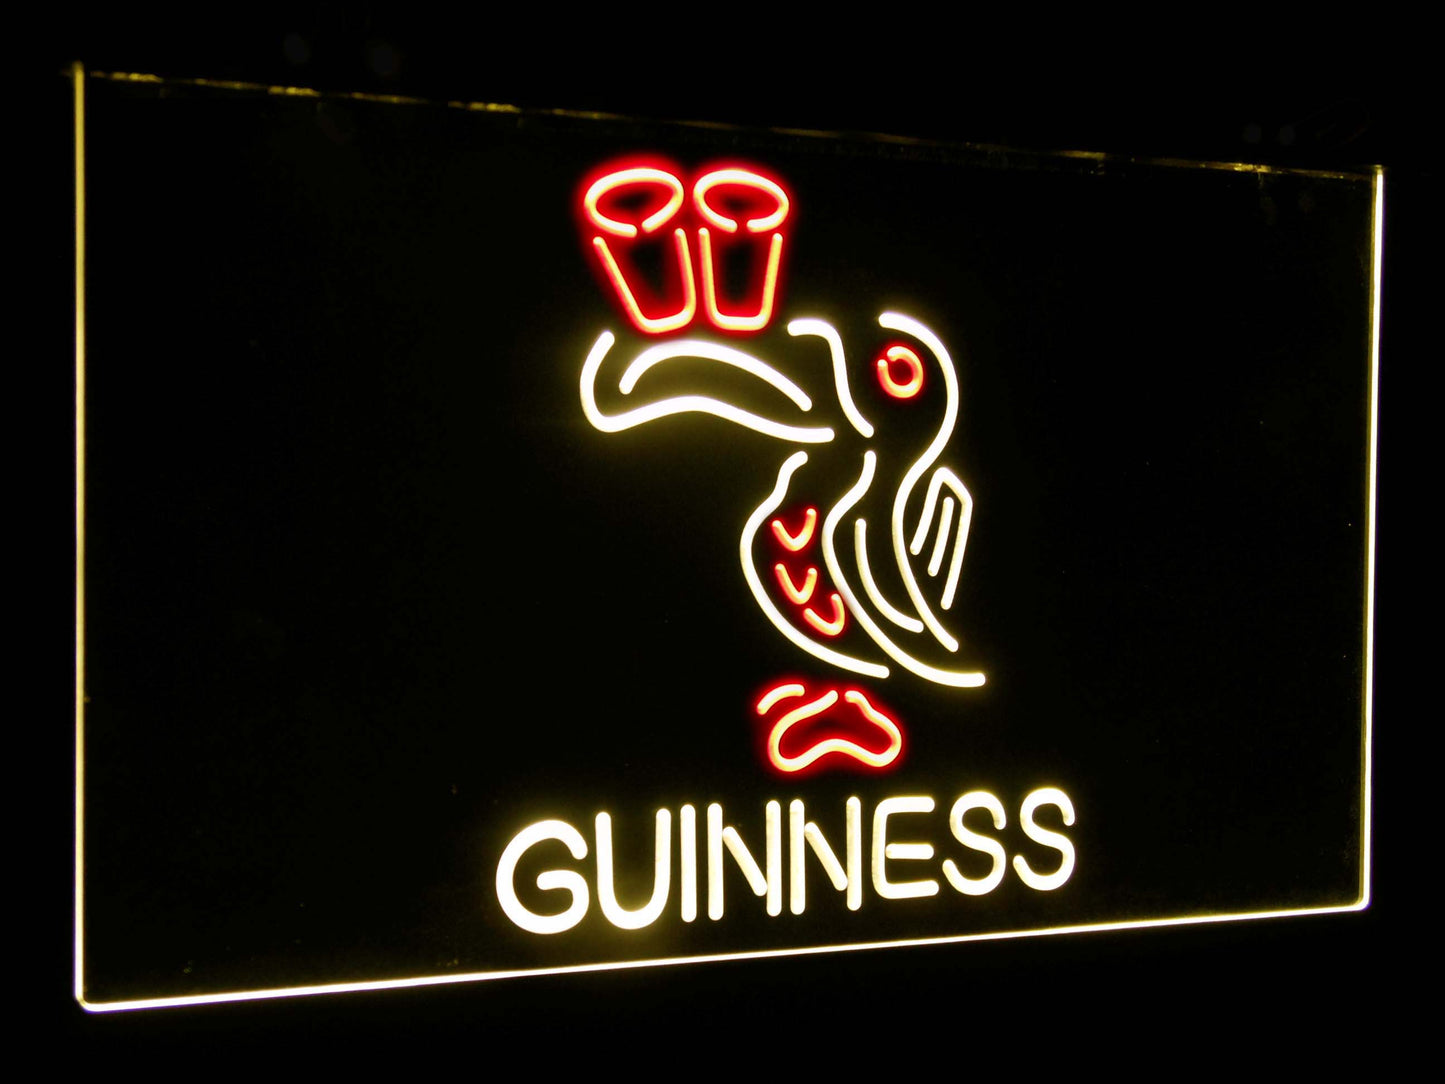 Lovely Day Guinness  Toucan Bar Decor Dual Color Led Neon Light Signs st6-a2121 by Woody Signs Co. - Handmade Crafted Unique Wooden Creative